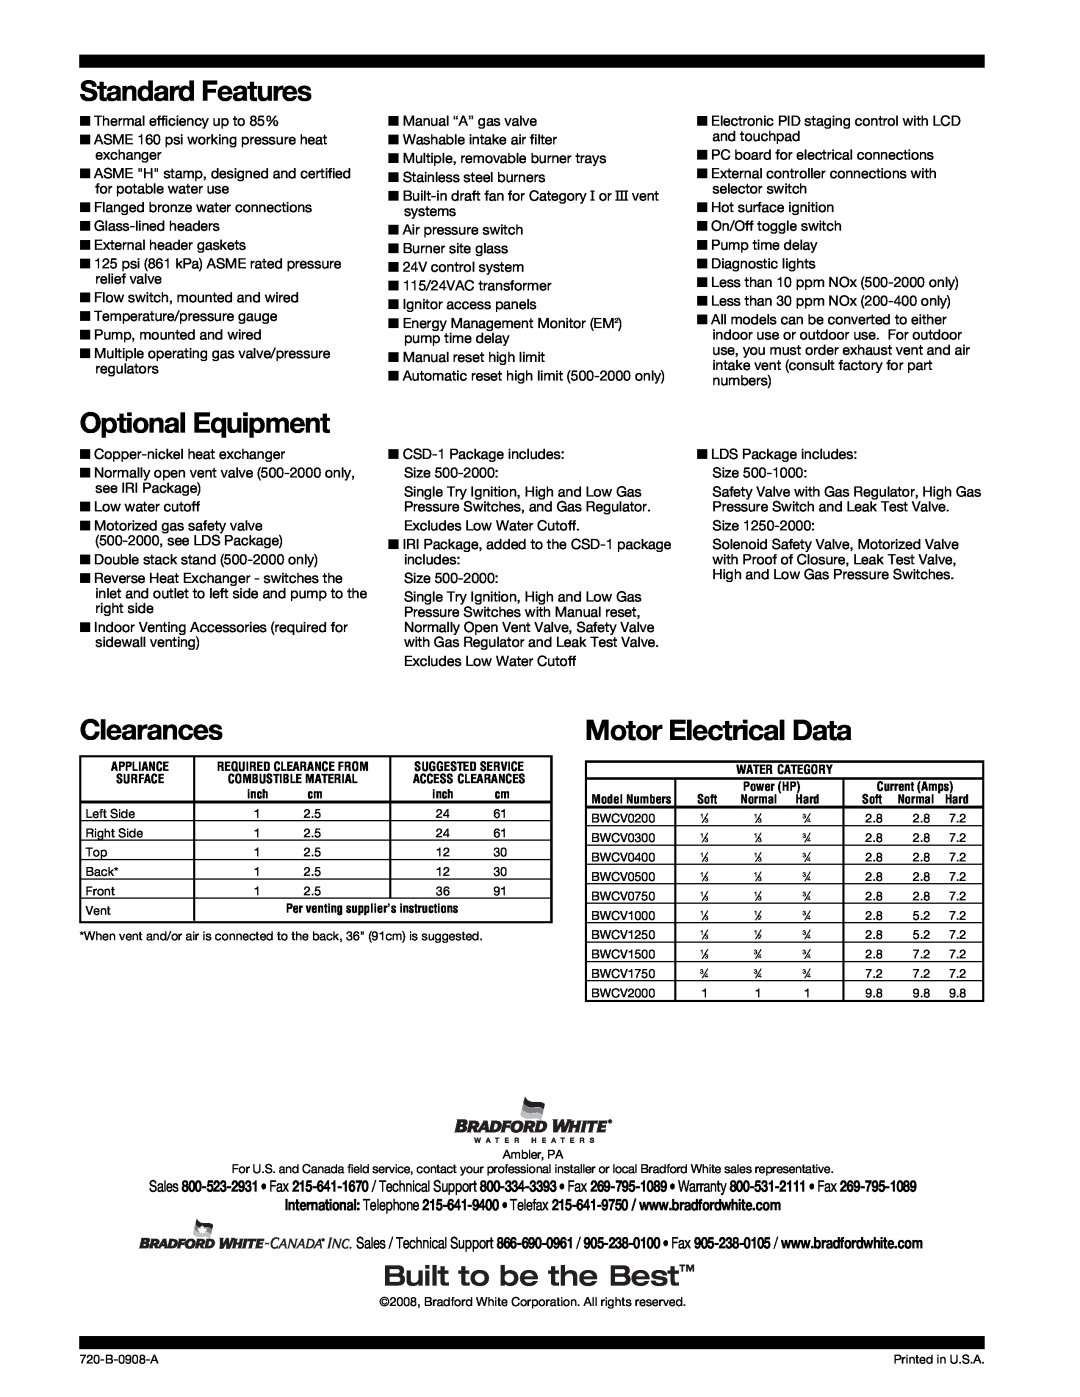 Bradford-White Corp 720-B Standard Features, Optional Equipment, Clearances, Motor Electrical Data, Printed in U.S.A 